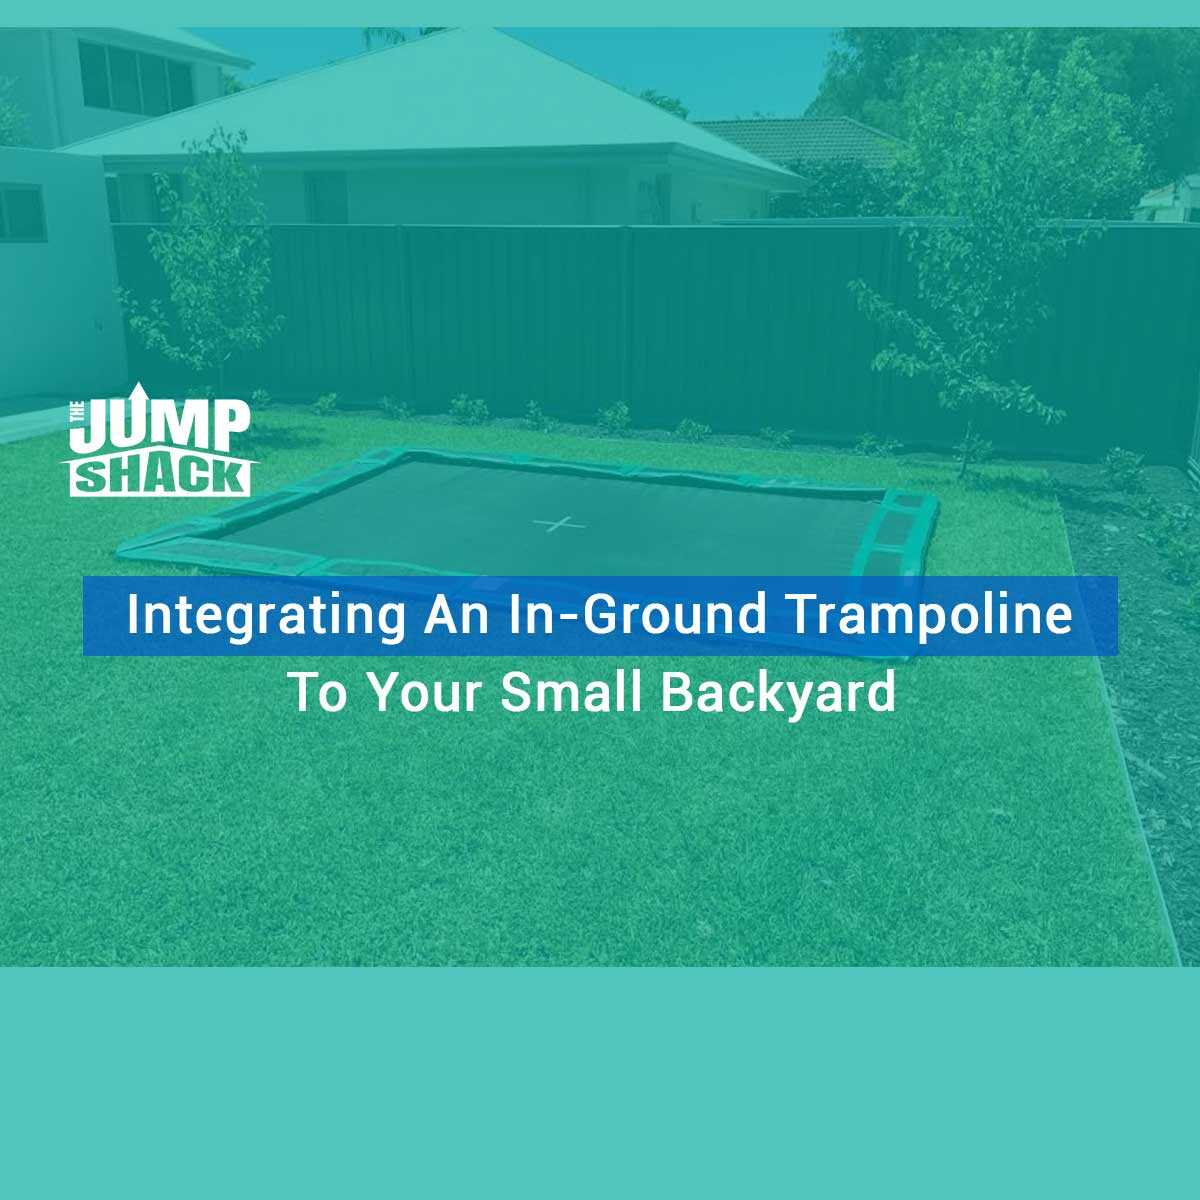 Integrating An In-Ground Trampoline To Your Small Backyard